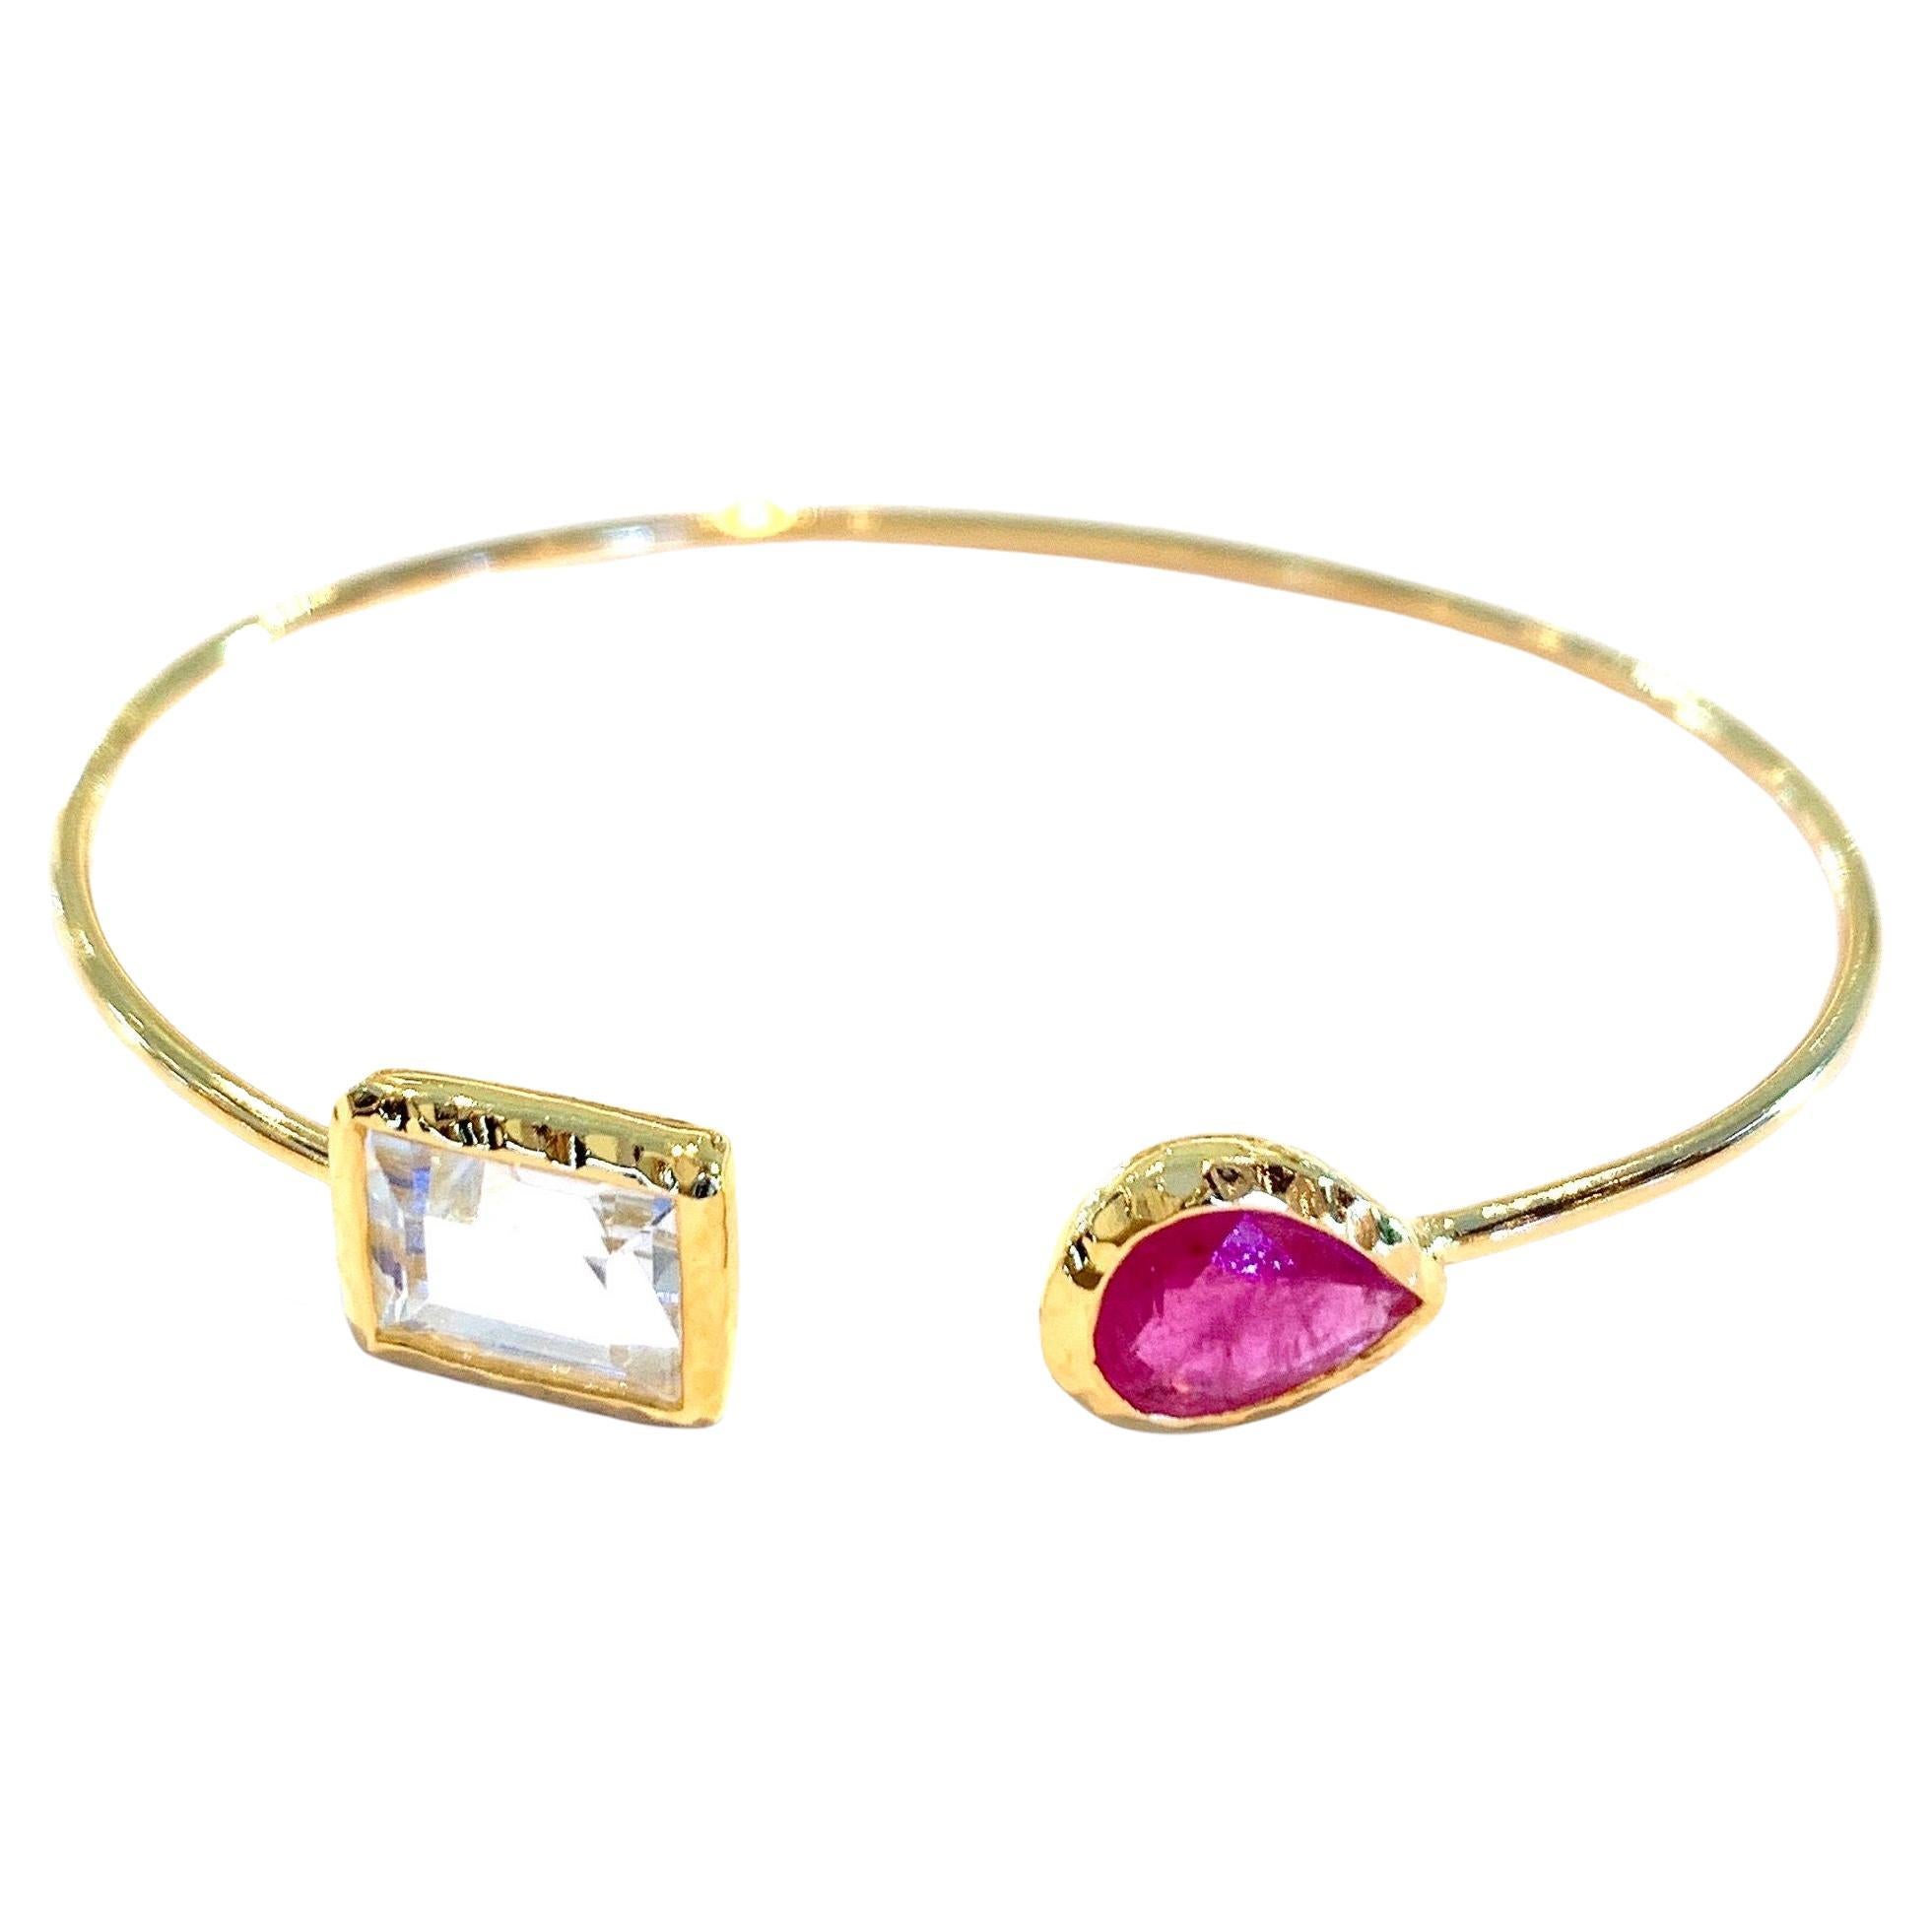 Bochic “Jungle” Bangle White Step Cut Topaz and Red Ruby, Silver & 22k Gold